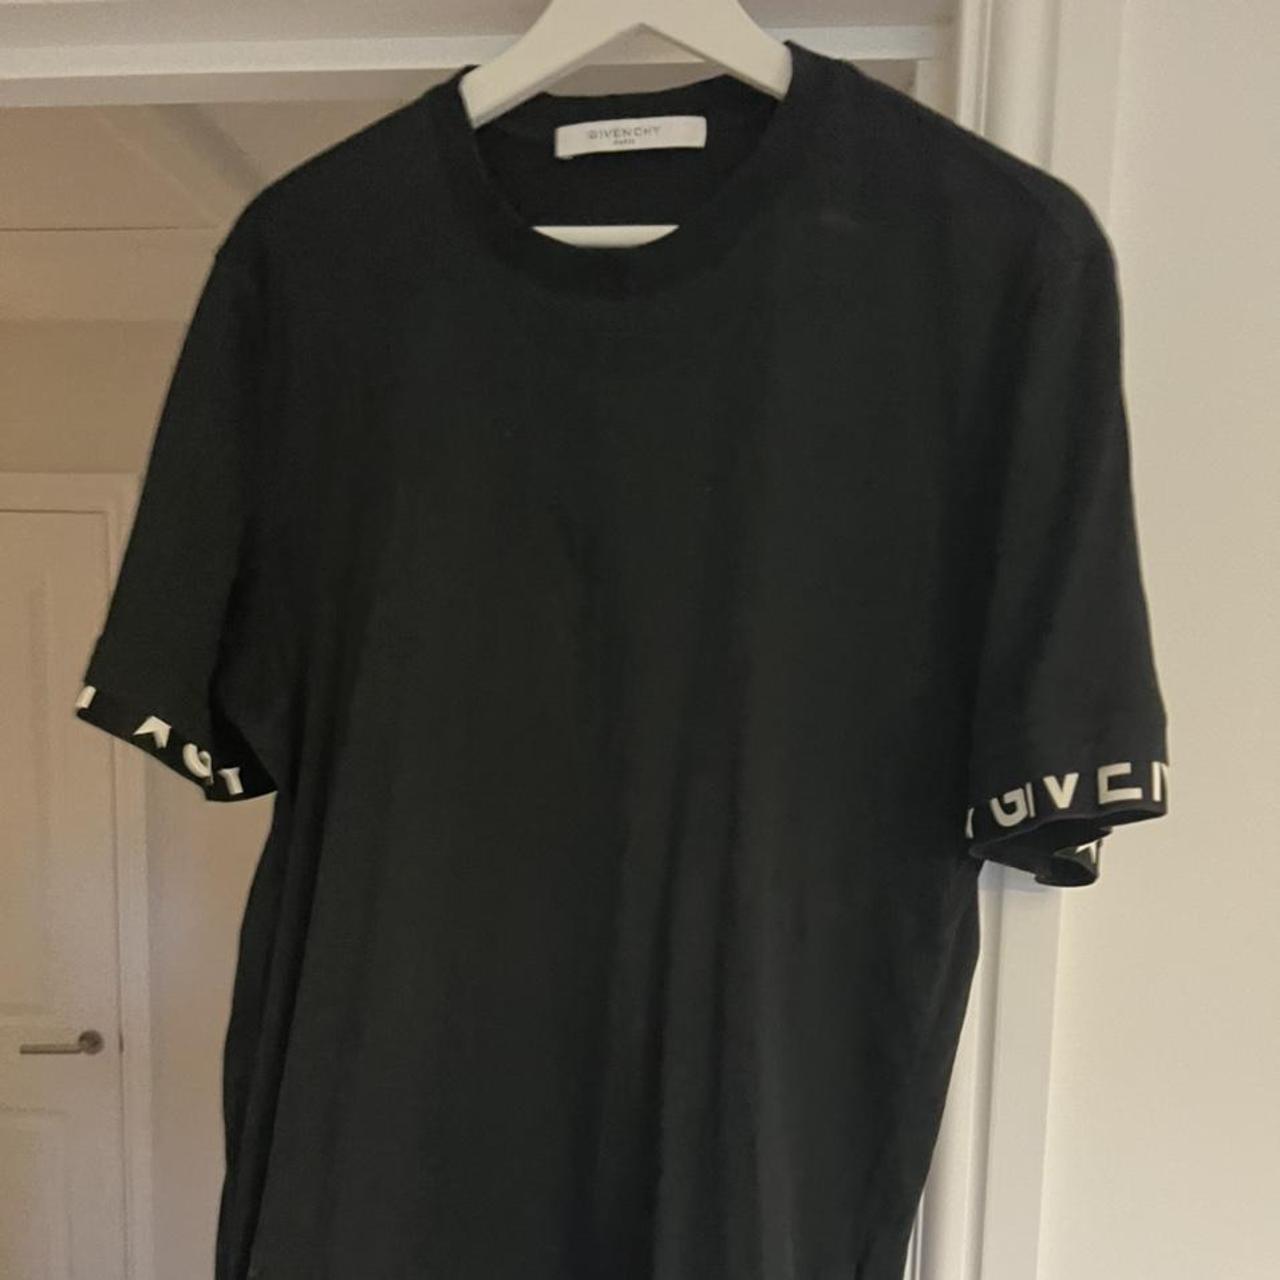 Givenchy T-Shirt in black. Worn 4-5 times but no... - Depop